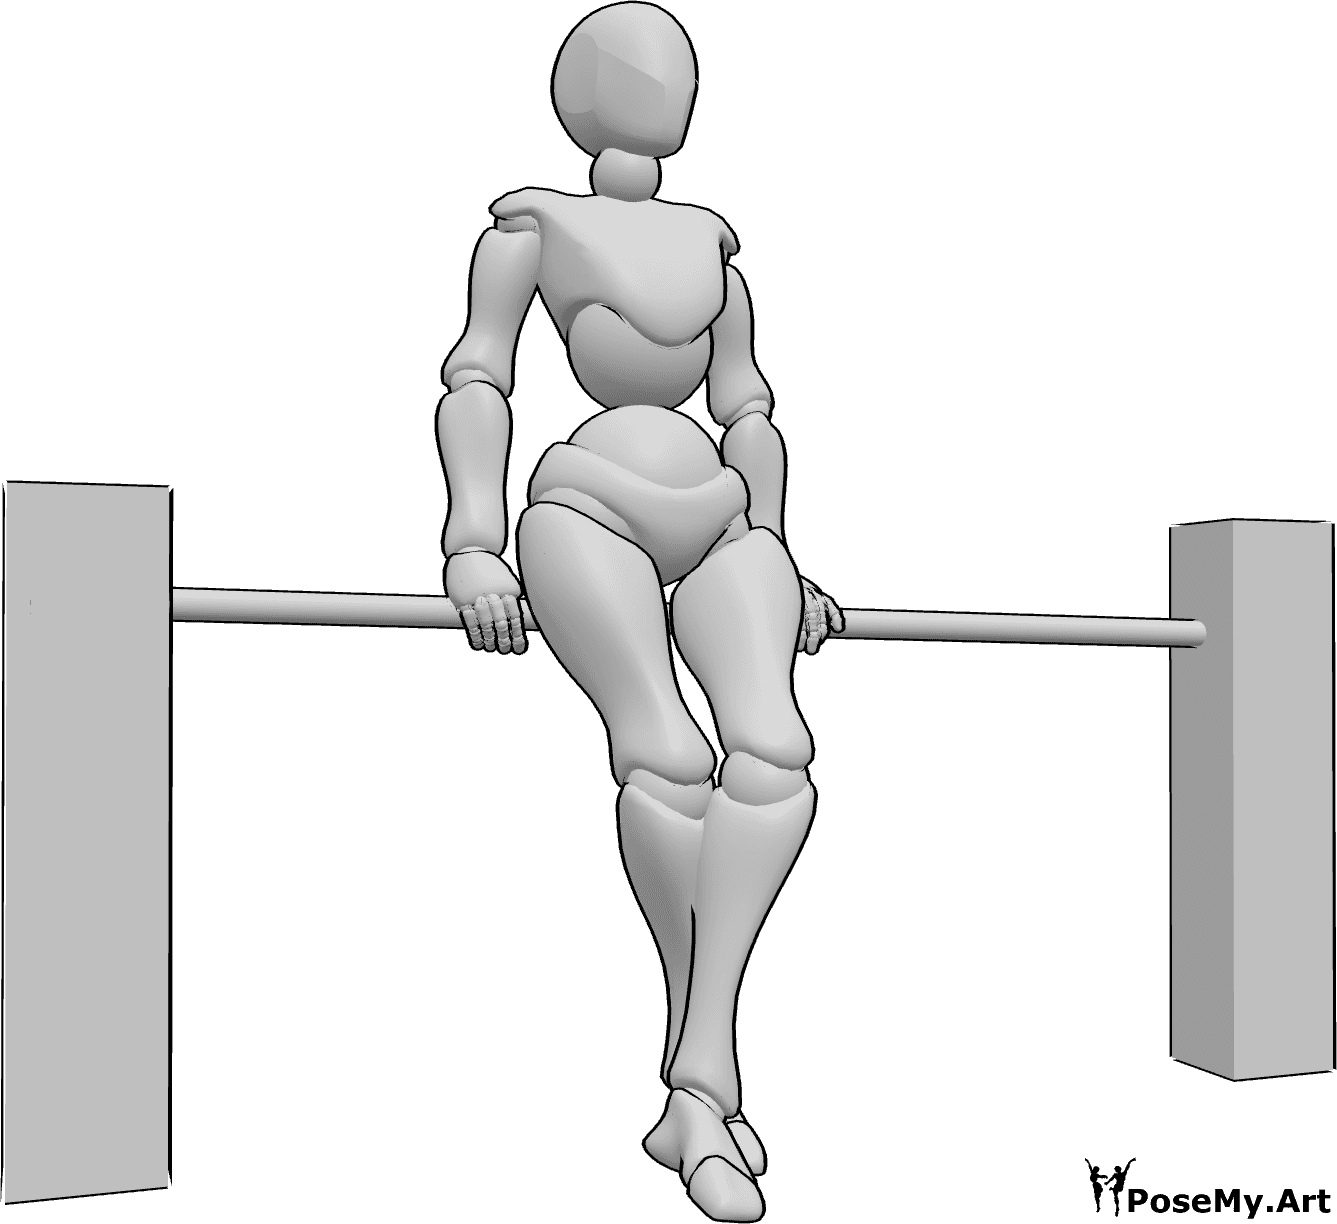 Pose Reference - Standing crossed legs pose - Female is leaning against the railing with her legs crossed